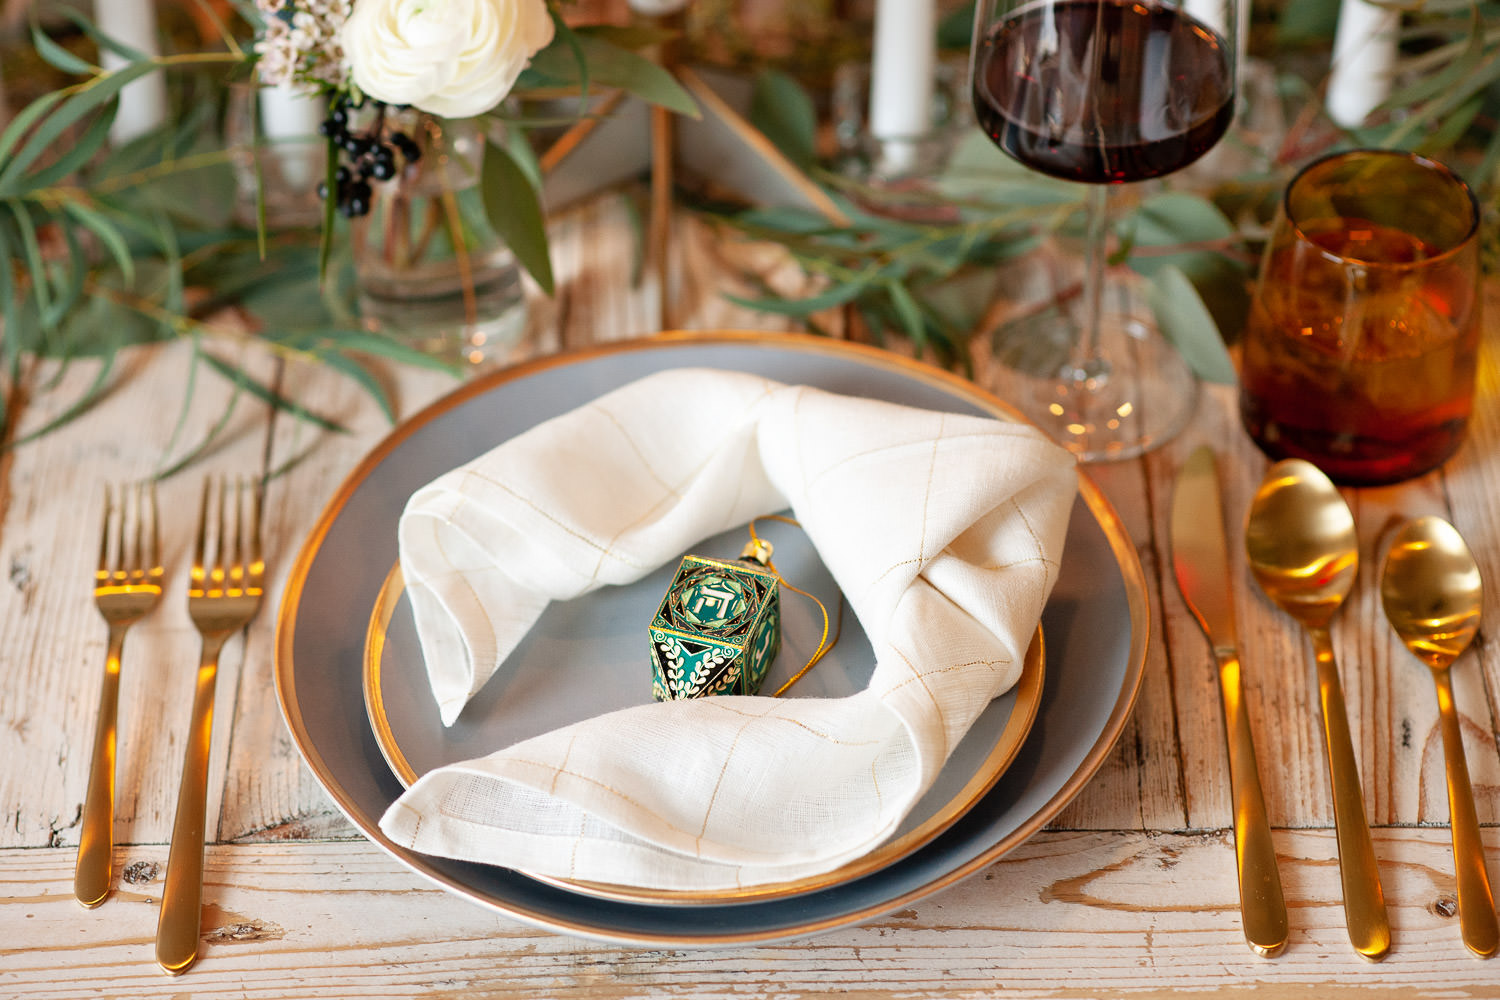 Gold-rimmed table settiing from Crate & Barrel captured by Calgary wedding photographer Tara Whittaker